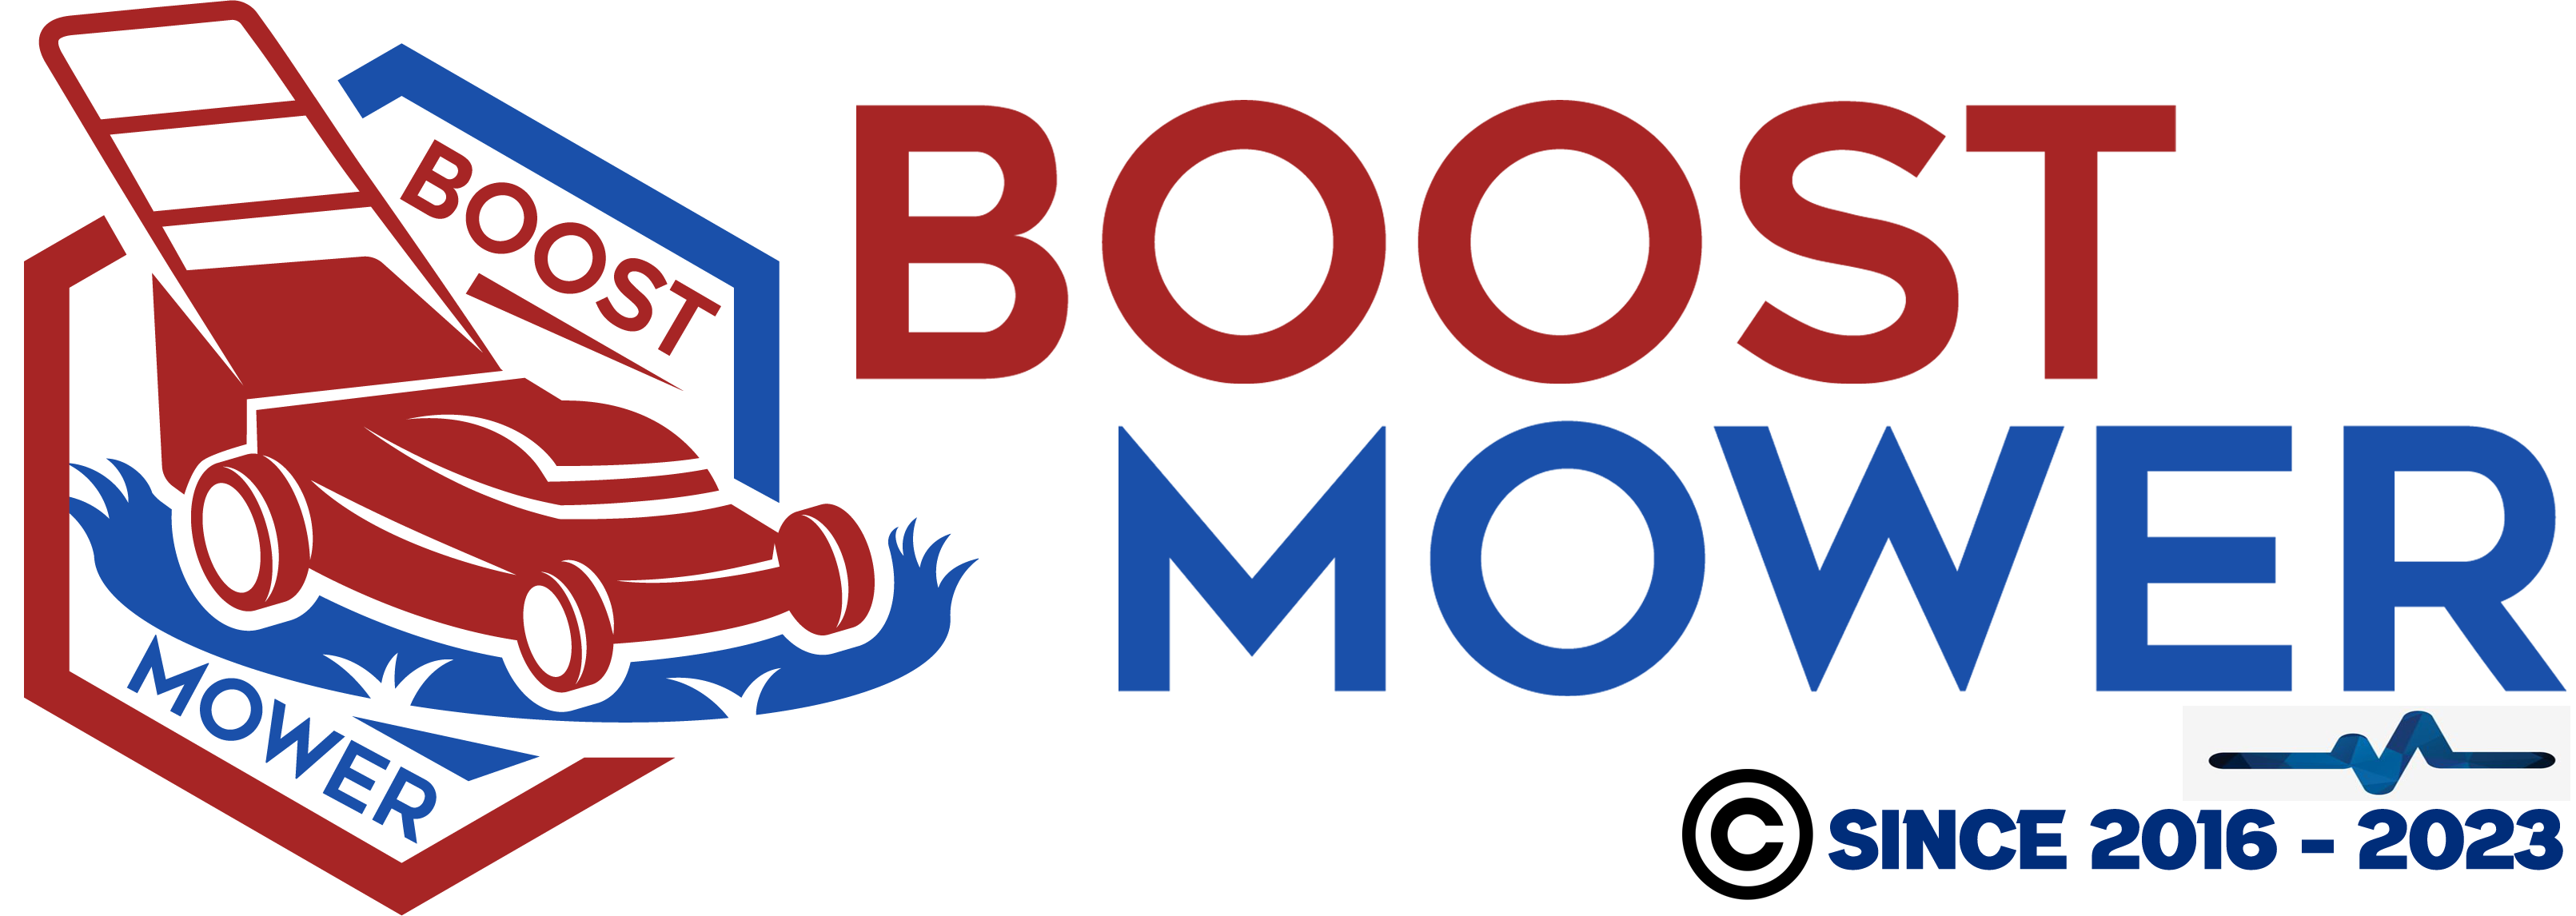 Boostmower.com - Safe shopping with PayPal